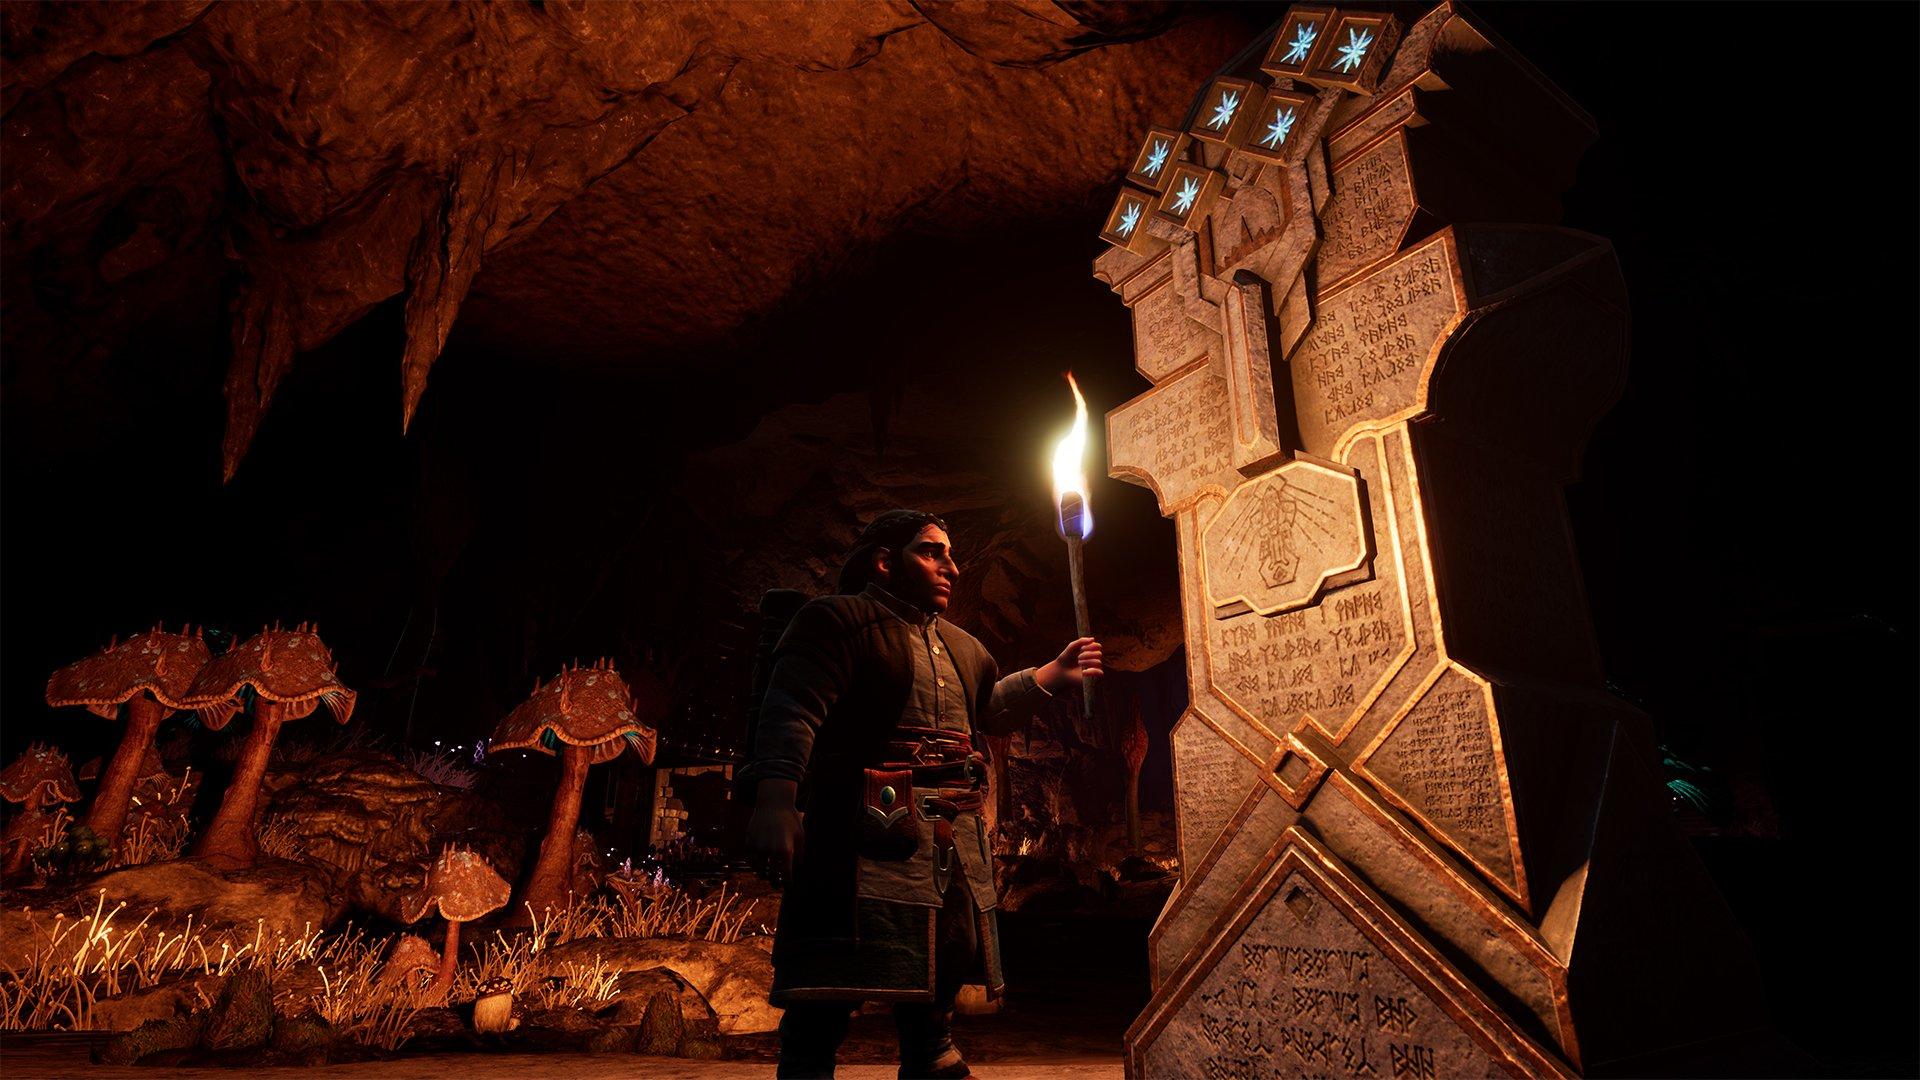 Embark on a New Adventure to Reclaim the Lost Kingdom of Khazad